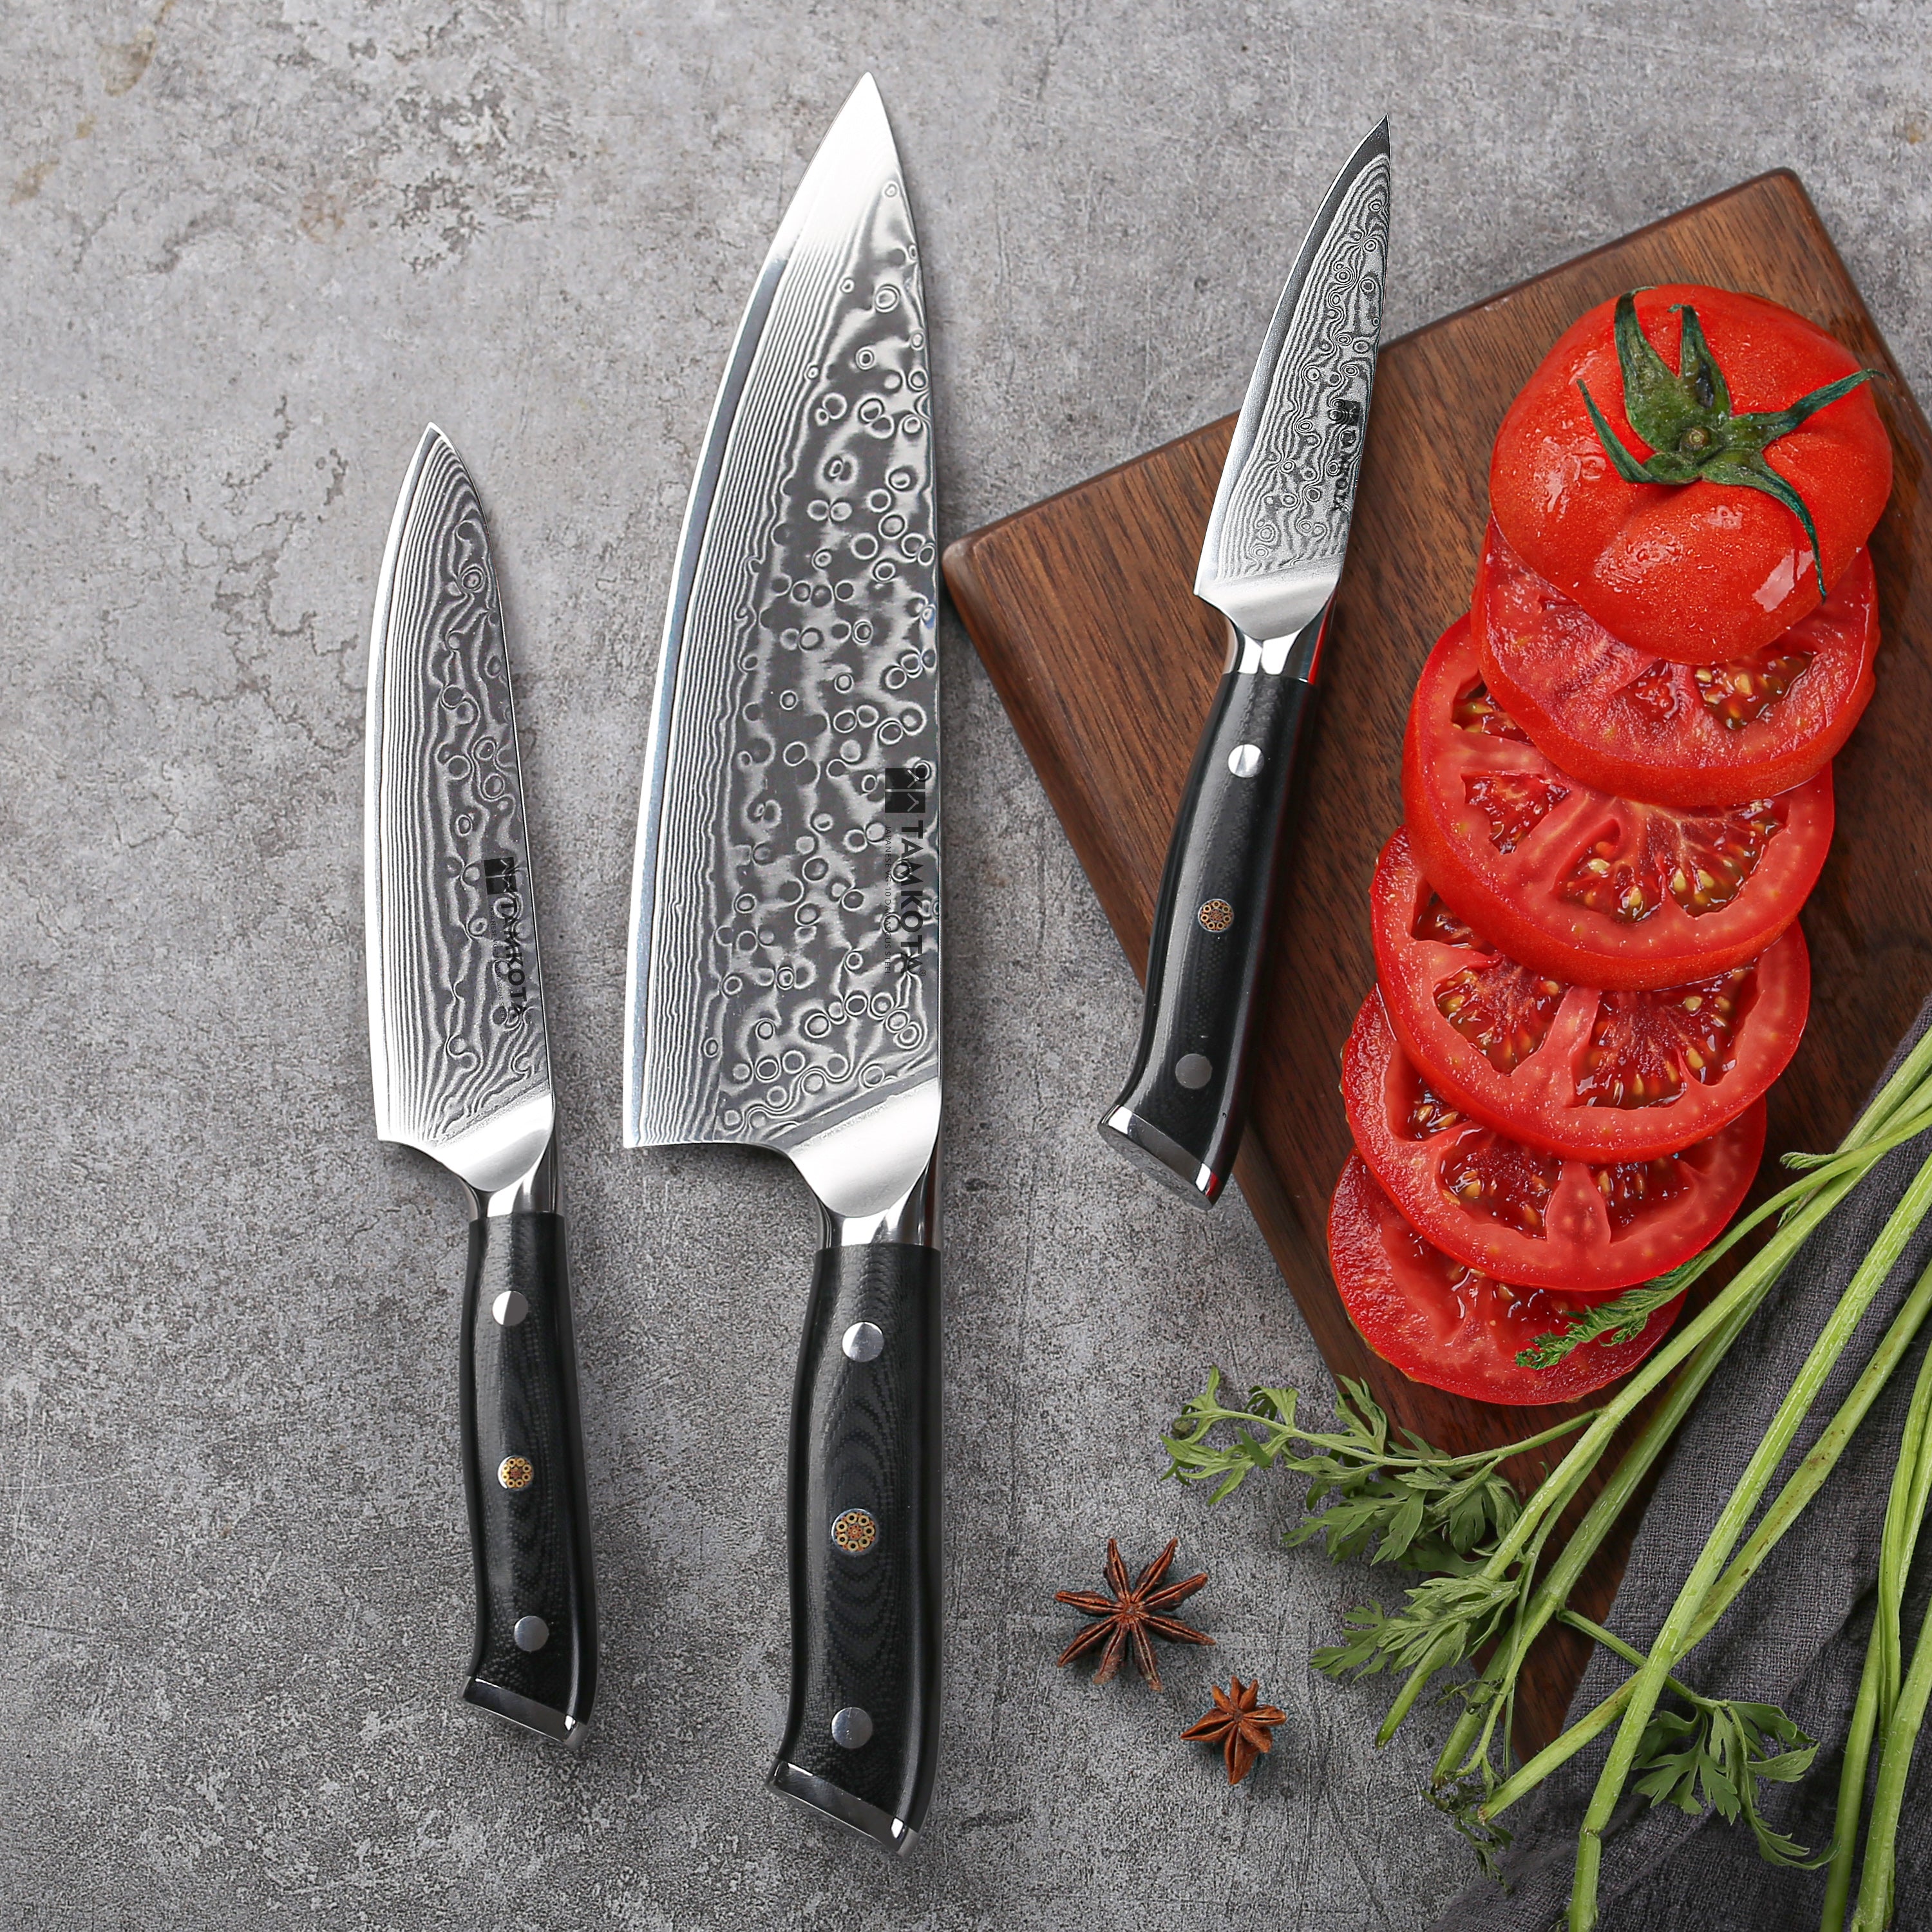 The Best 3 PCS Chef's Knife Set According to Pro Chefs